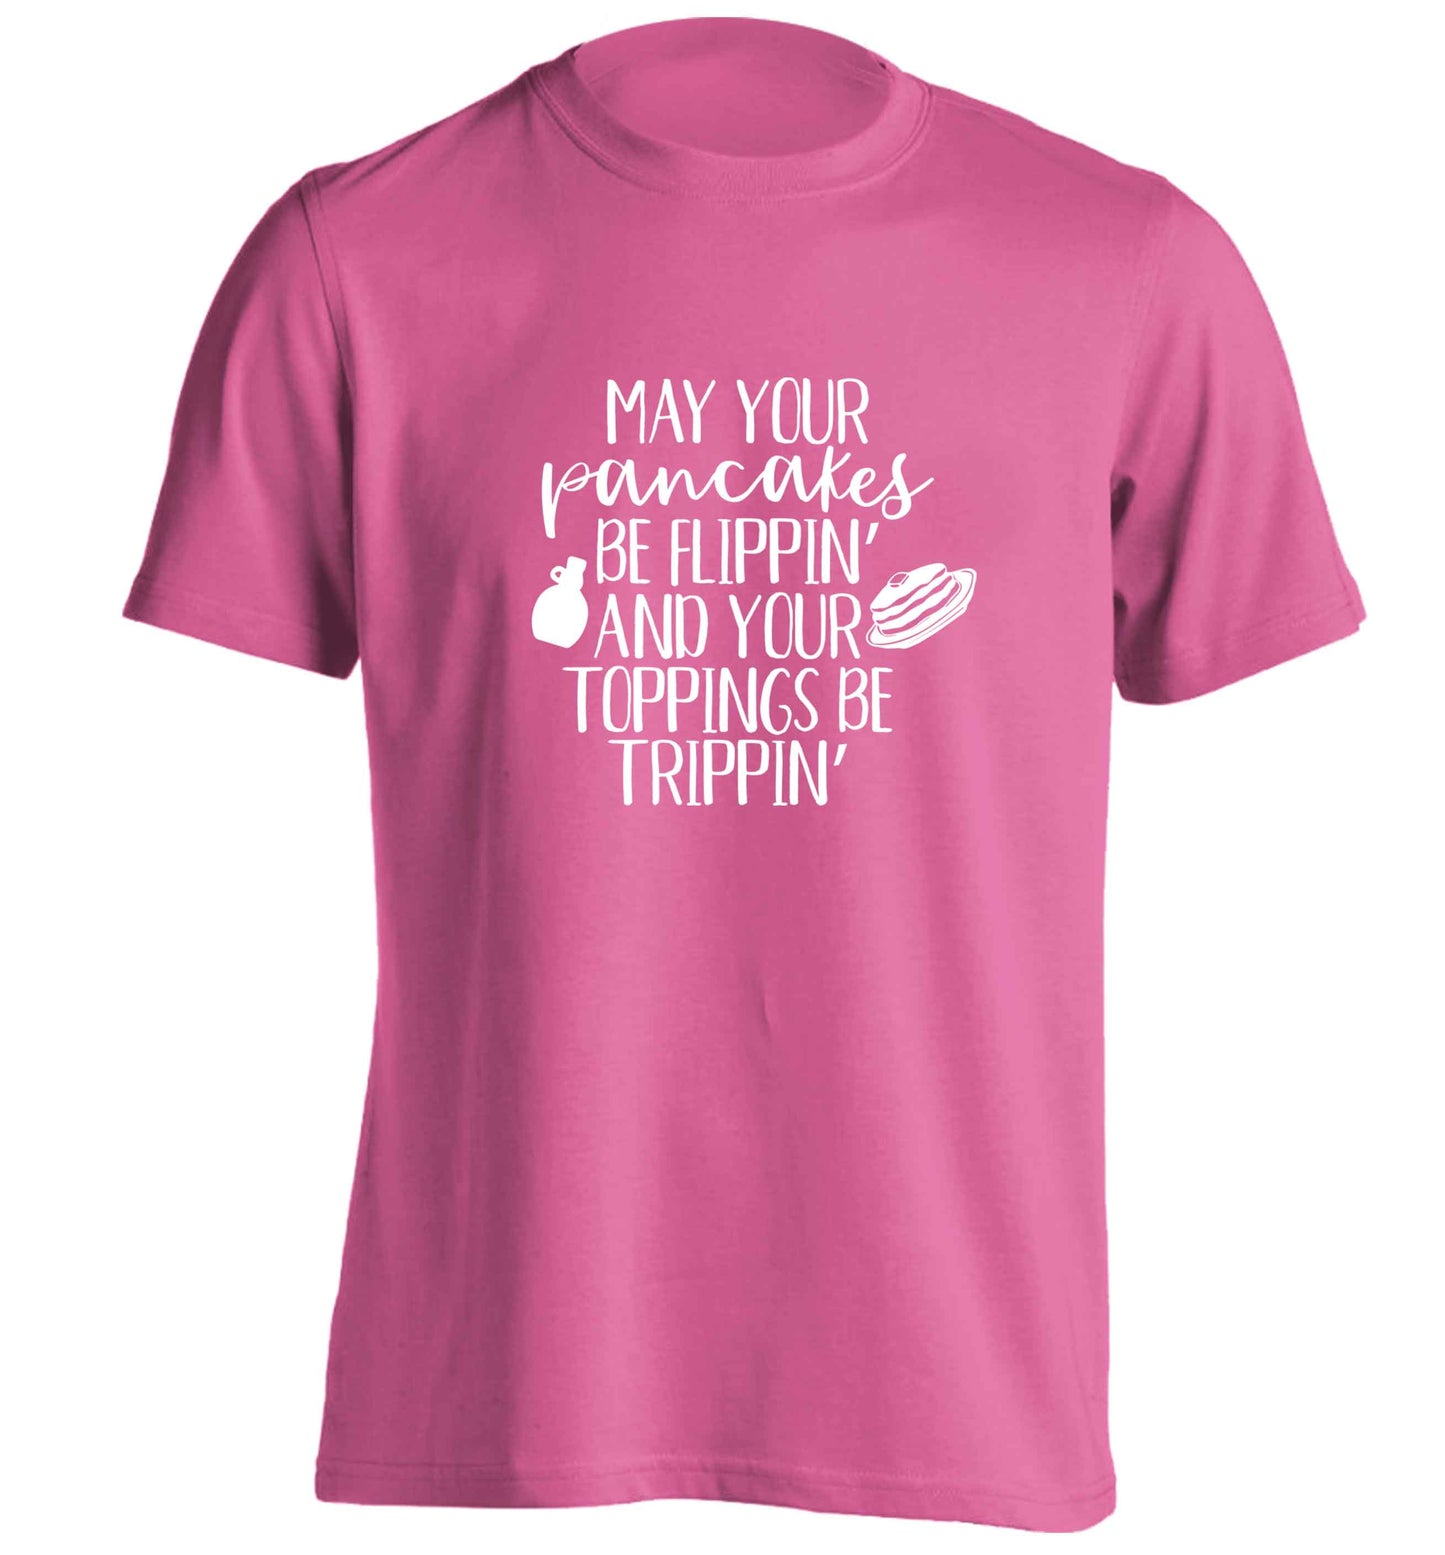 May your pancakes be flippin' and your toppings be trippin' adults unisex pink Tshirt 2XL